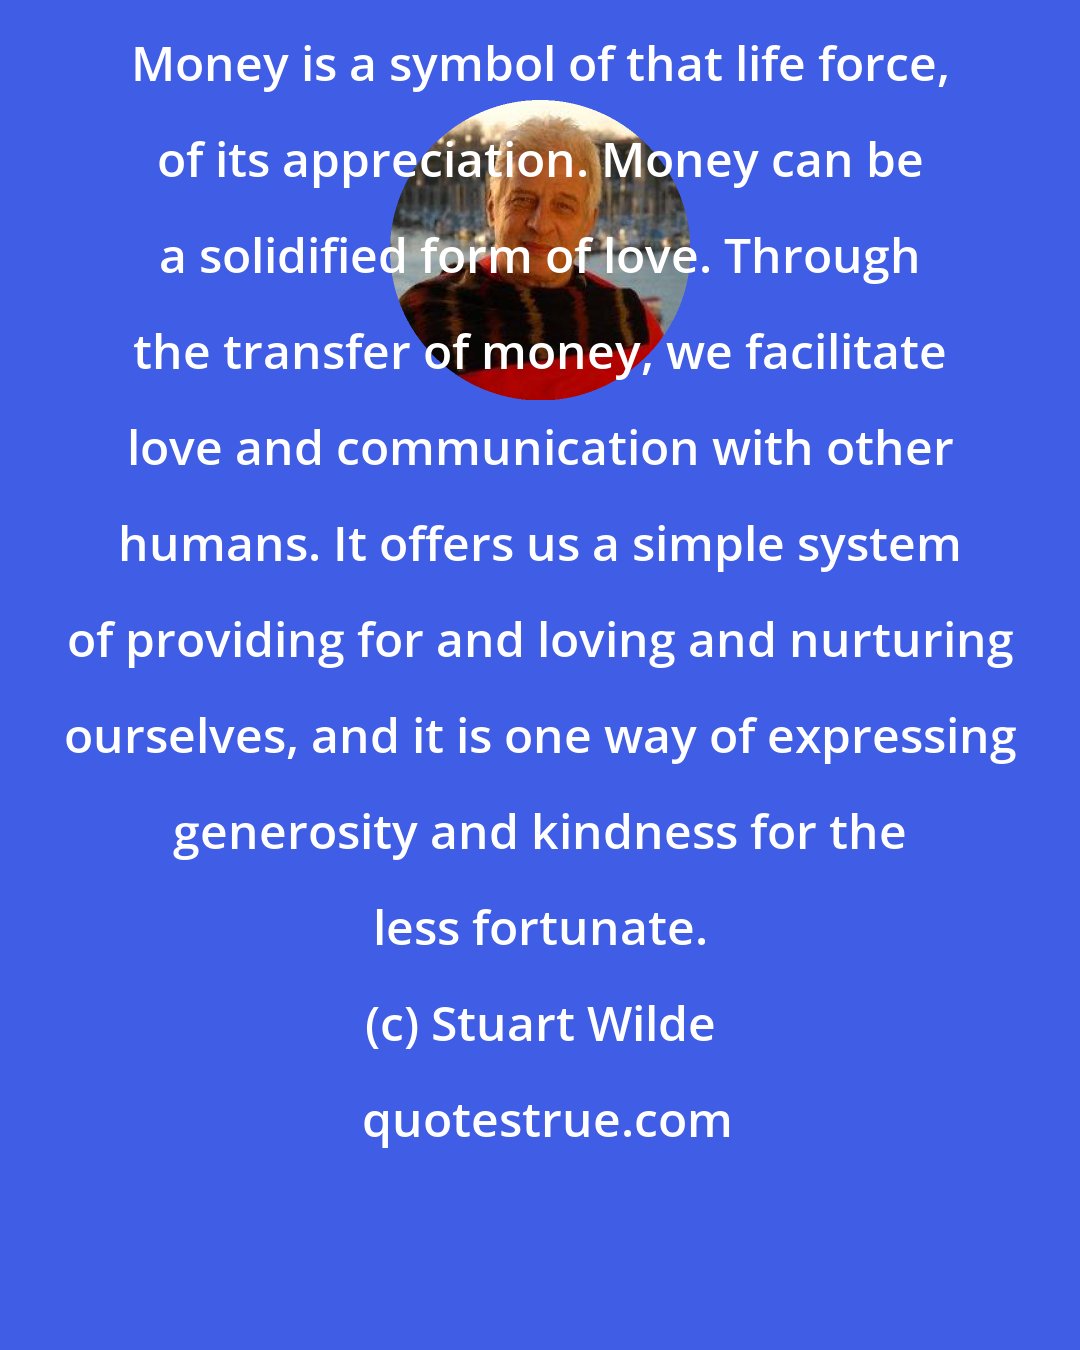 Stuart Wilde: Money is a symbol of that life force, of its appreciation. Money can be a solidified form of love. Through the transfer of money, we facilitate love and communication with other humans. It offers us a simple system of providing for and loving and nurturing ourselves, and it is one way of expressing generosity and kindness for the less fortunate.